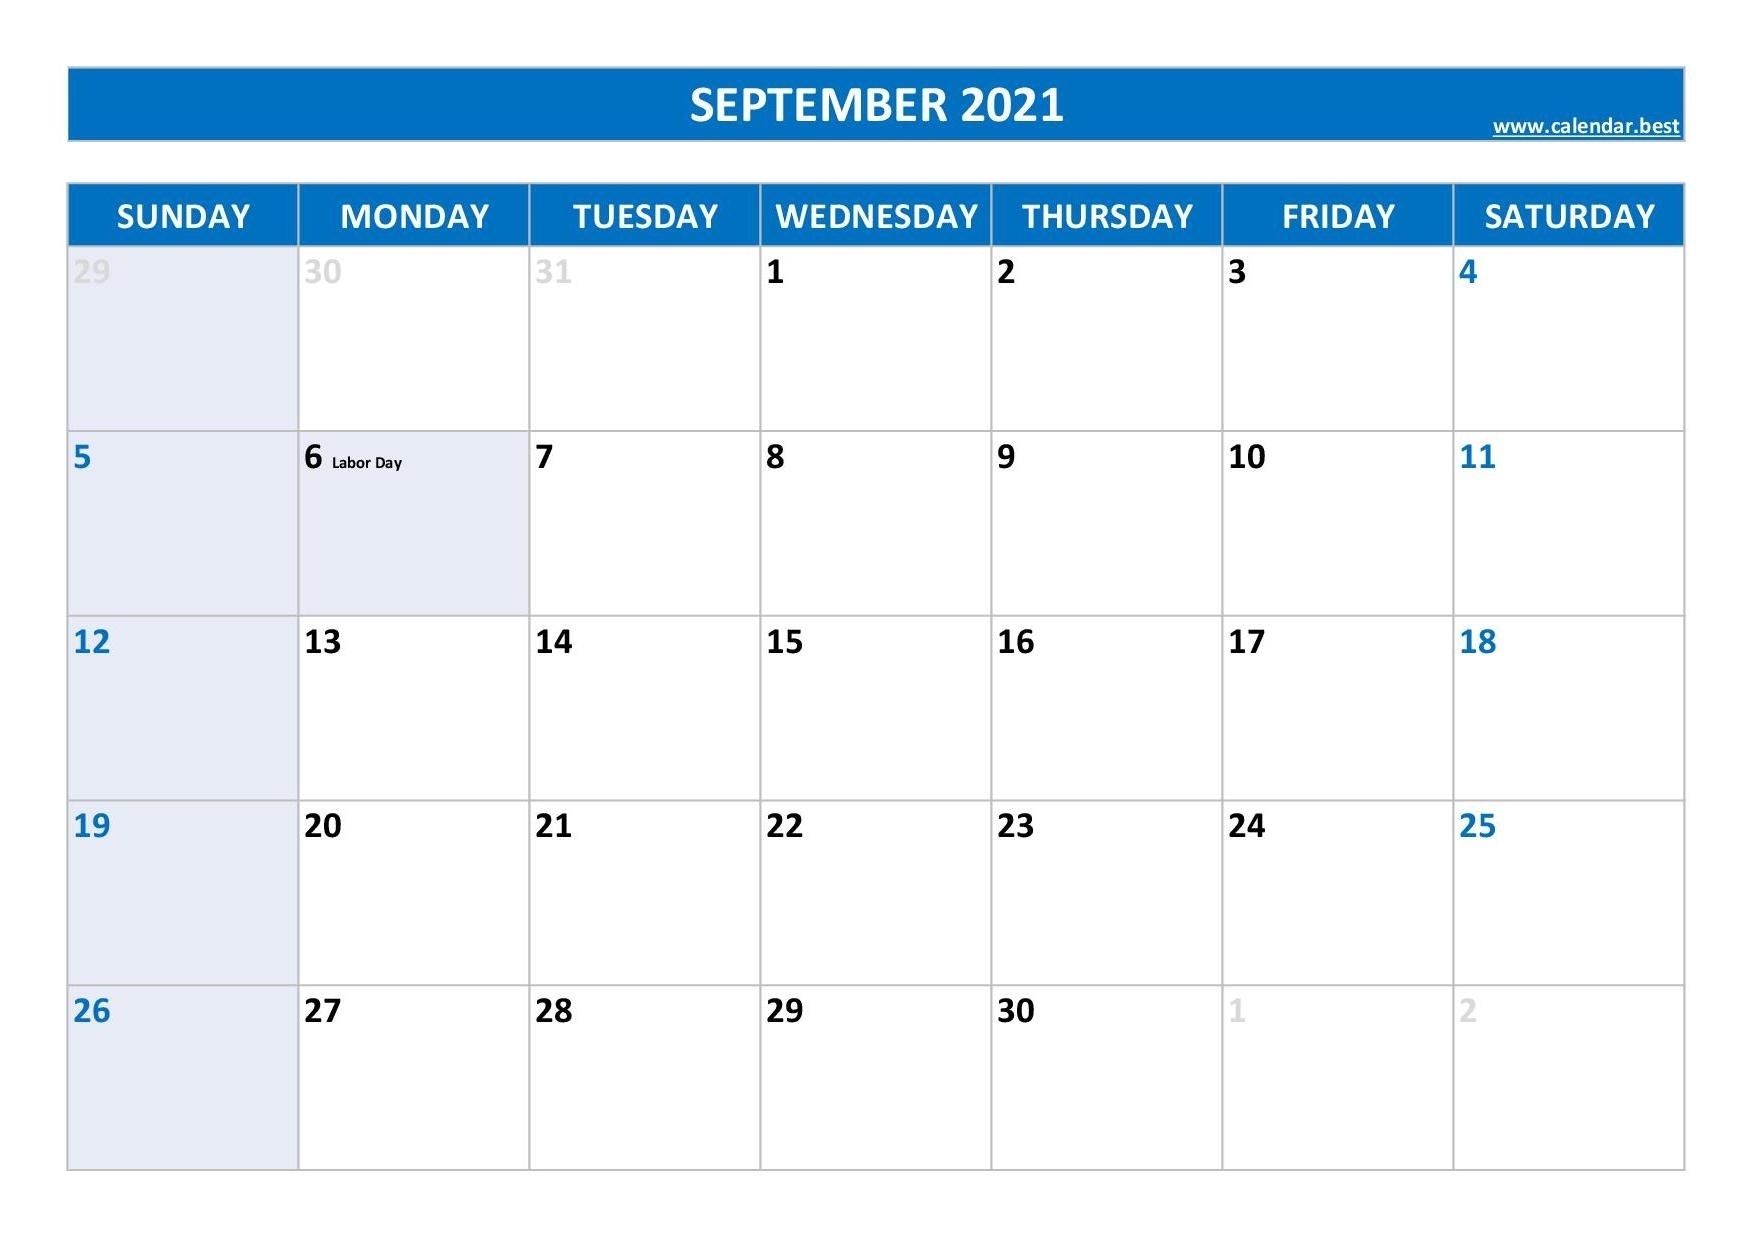 September 2021 Calendar -Calendar.best September 2021 Calendar With Holidays